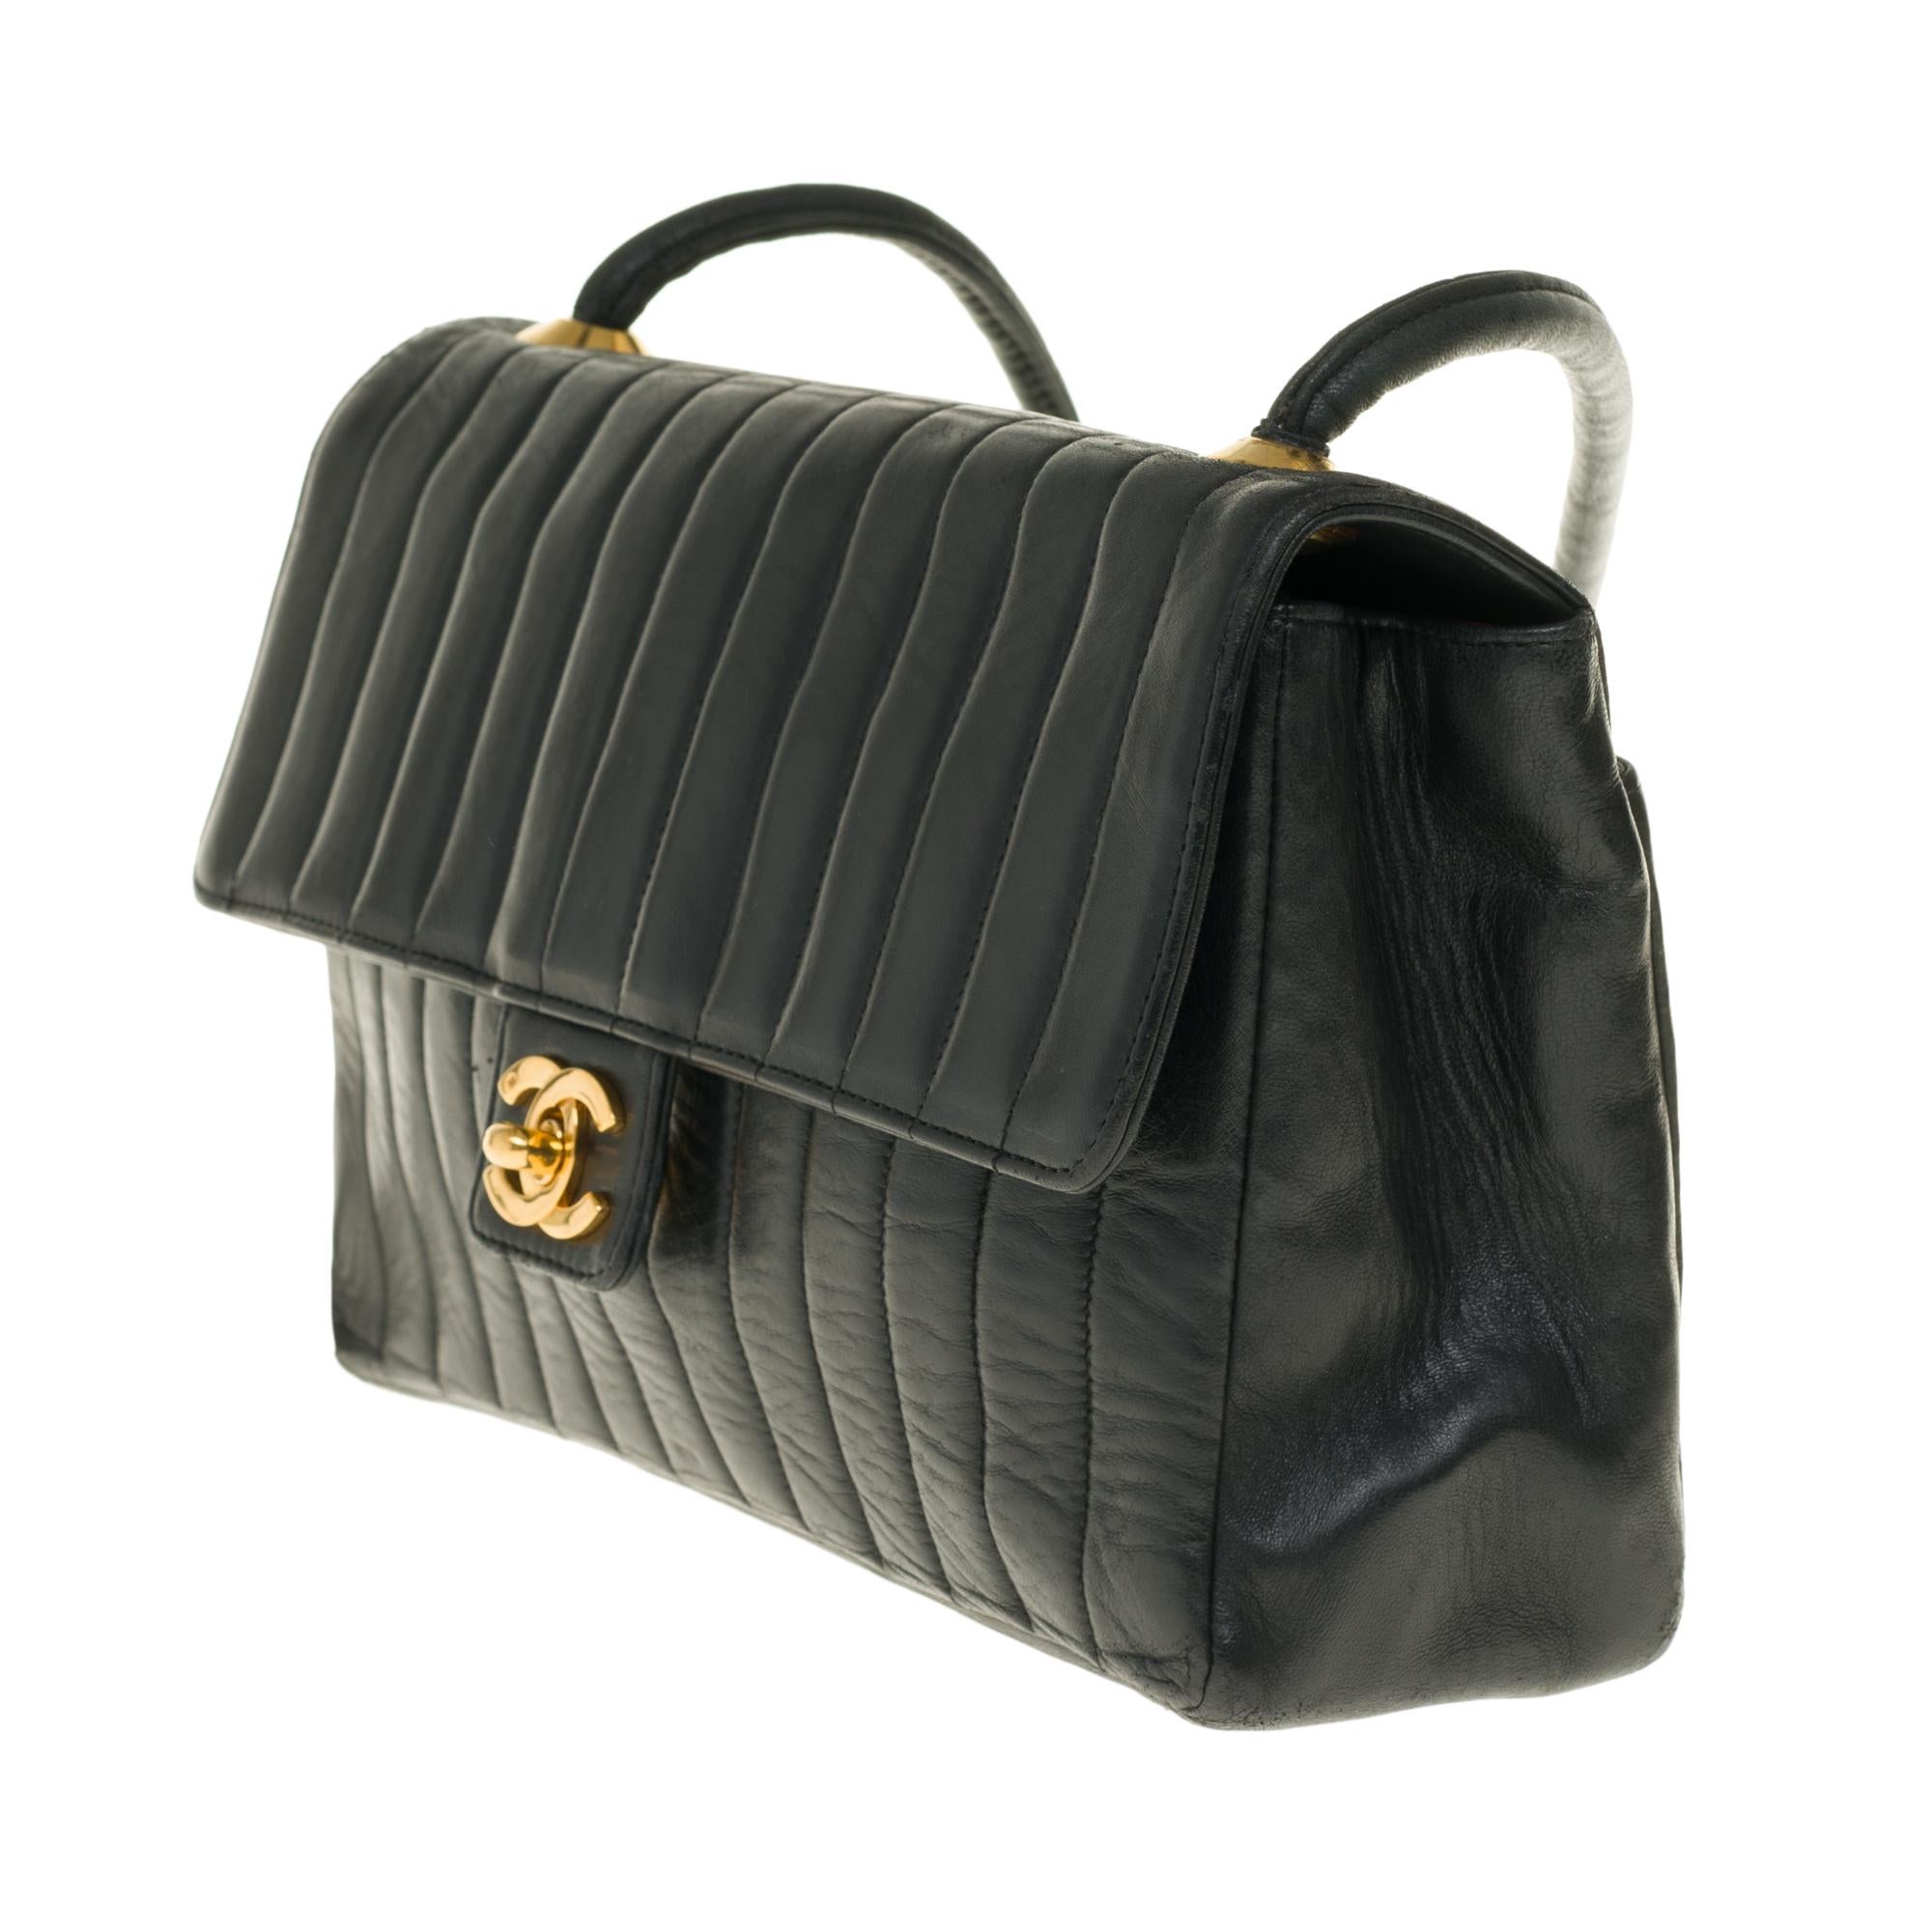 Black Chanel Classic shoulder bag in chevron black quilted lambskin with gold hardware